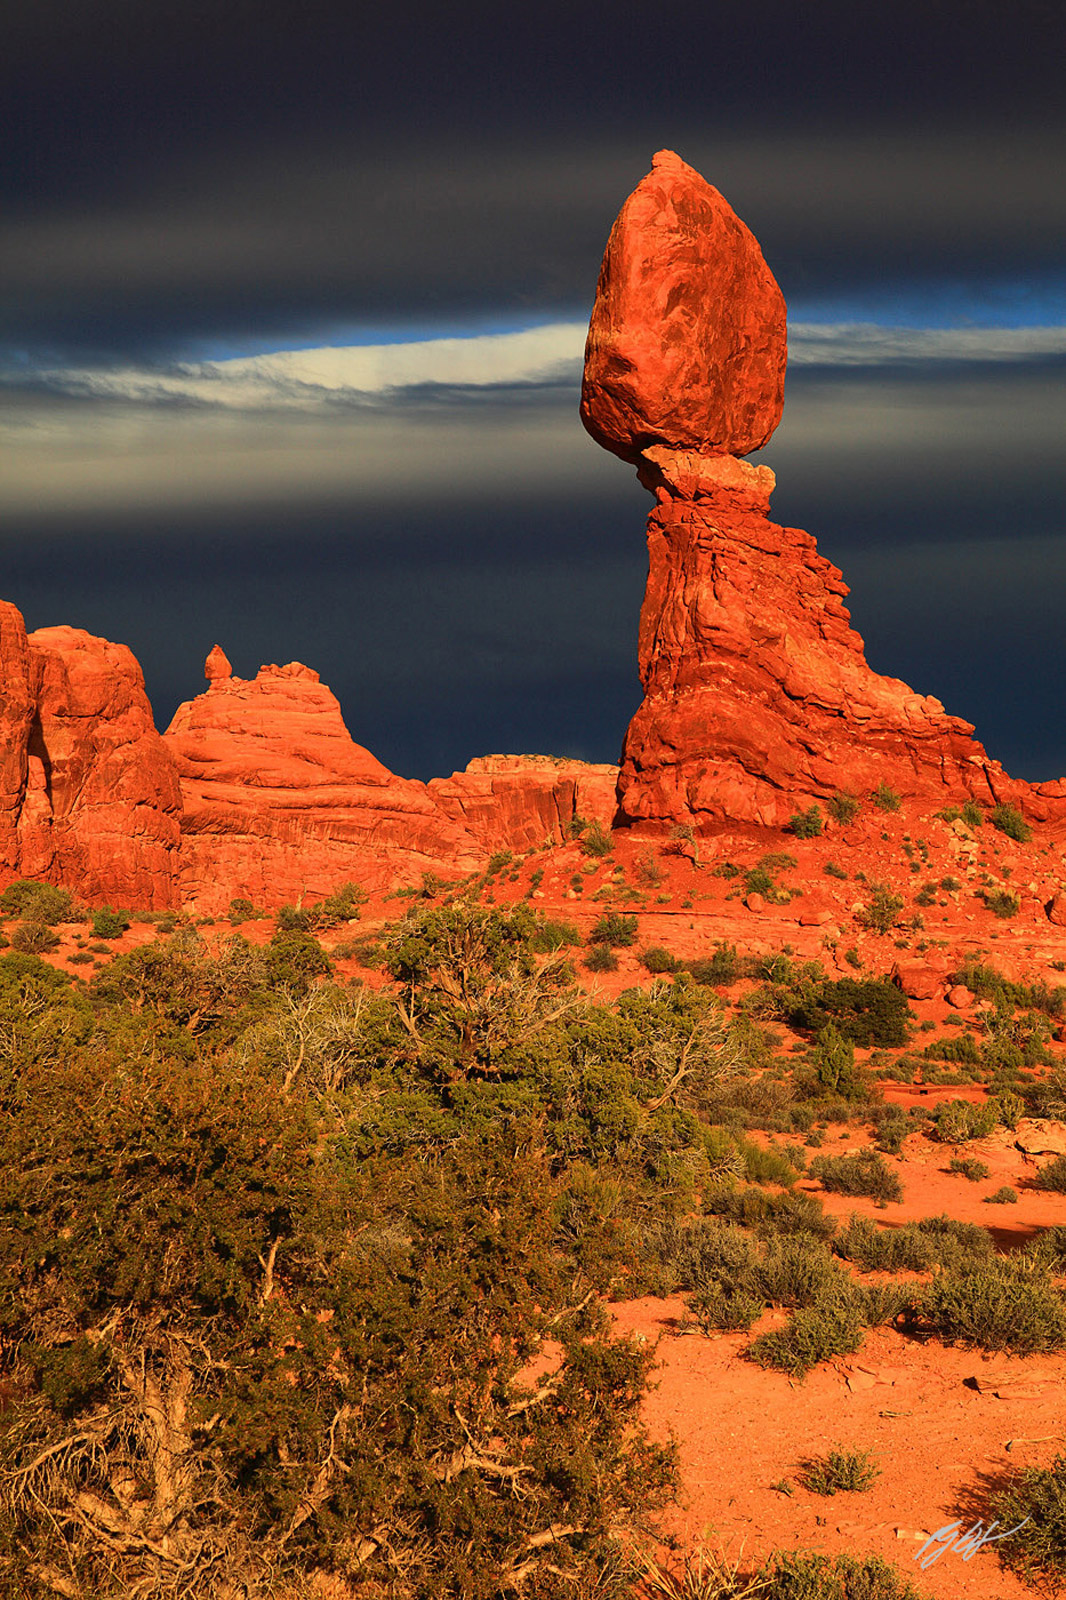 Evening Light on Balancing Rock from Arches National Park in Utah